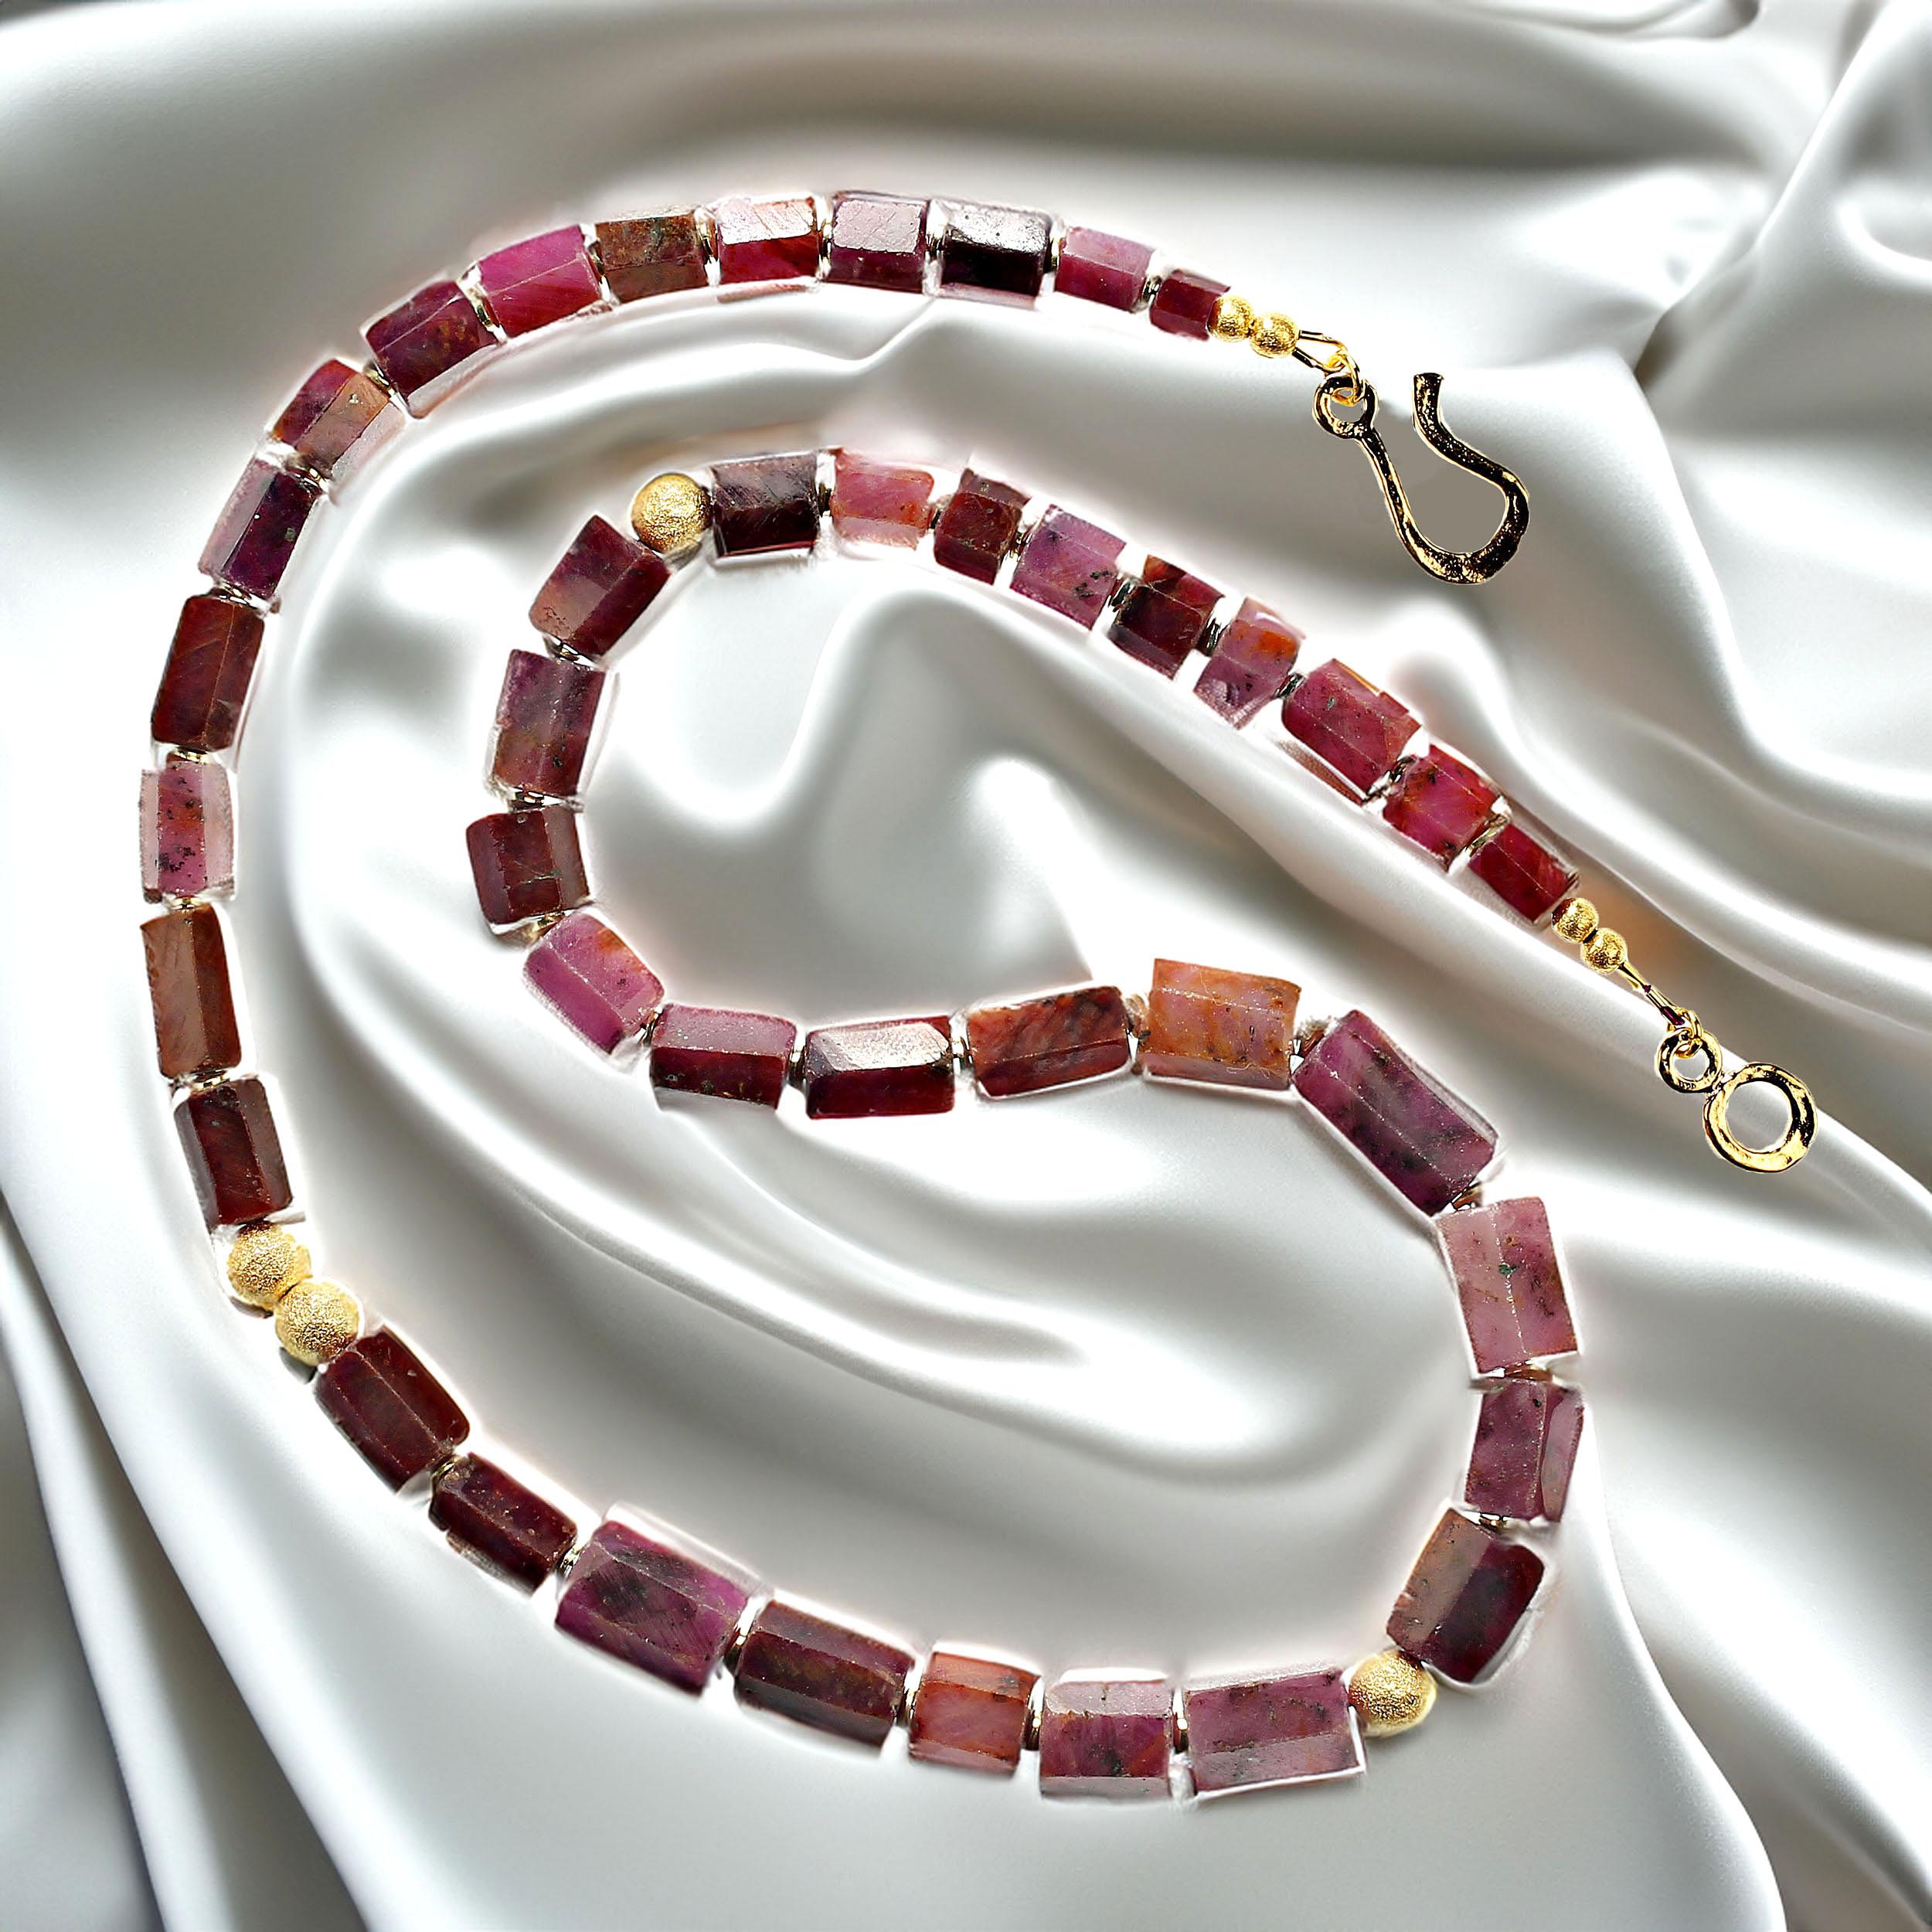 Graduated cubes of opaque natural ruby with goldy accents in a one-of-a-kind 23-inch necklace finished with a 14K vermeil hook and eye clasp. MN2337